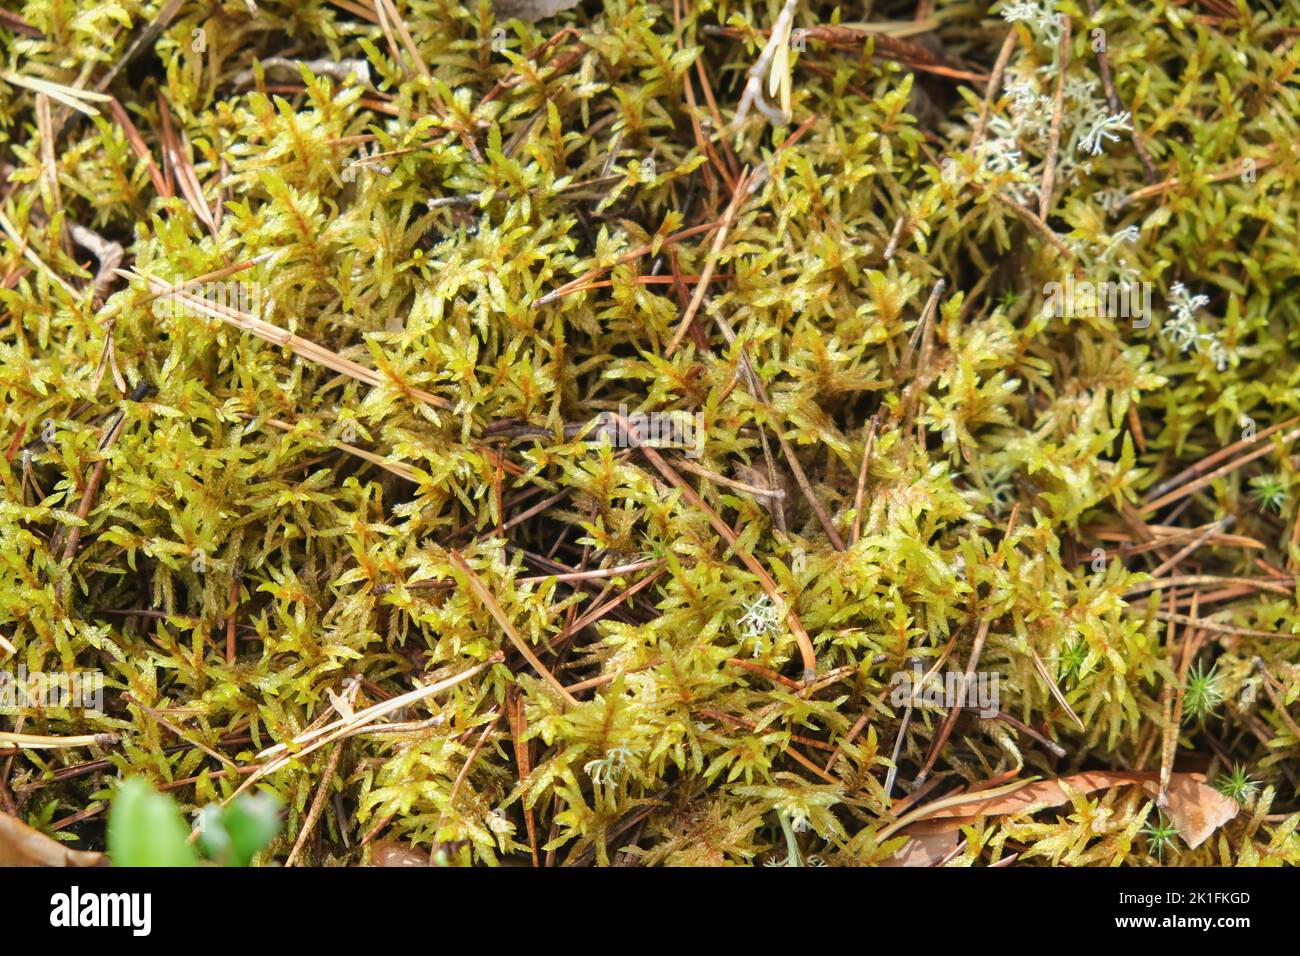 Polytrichum growing in the forest. Polytrichum growing among moss. Polytrichum close-up. Stock Photo